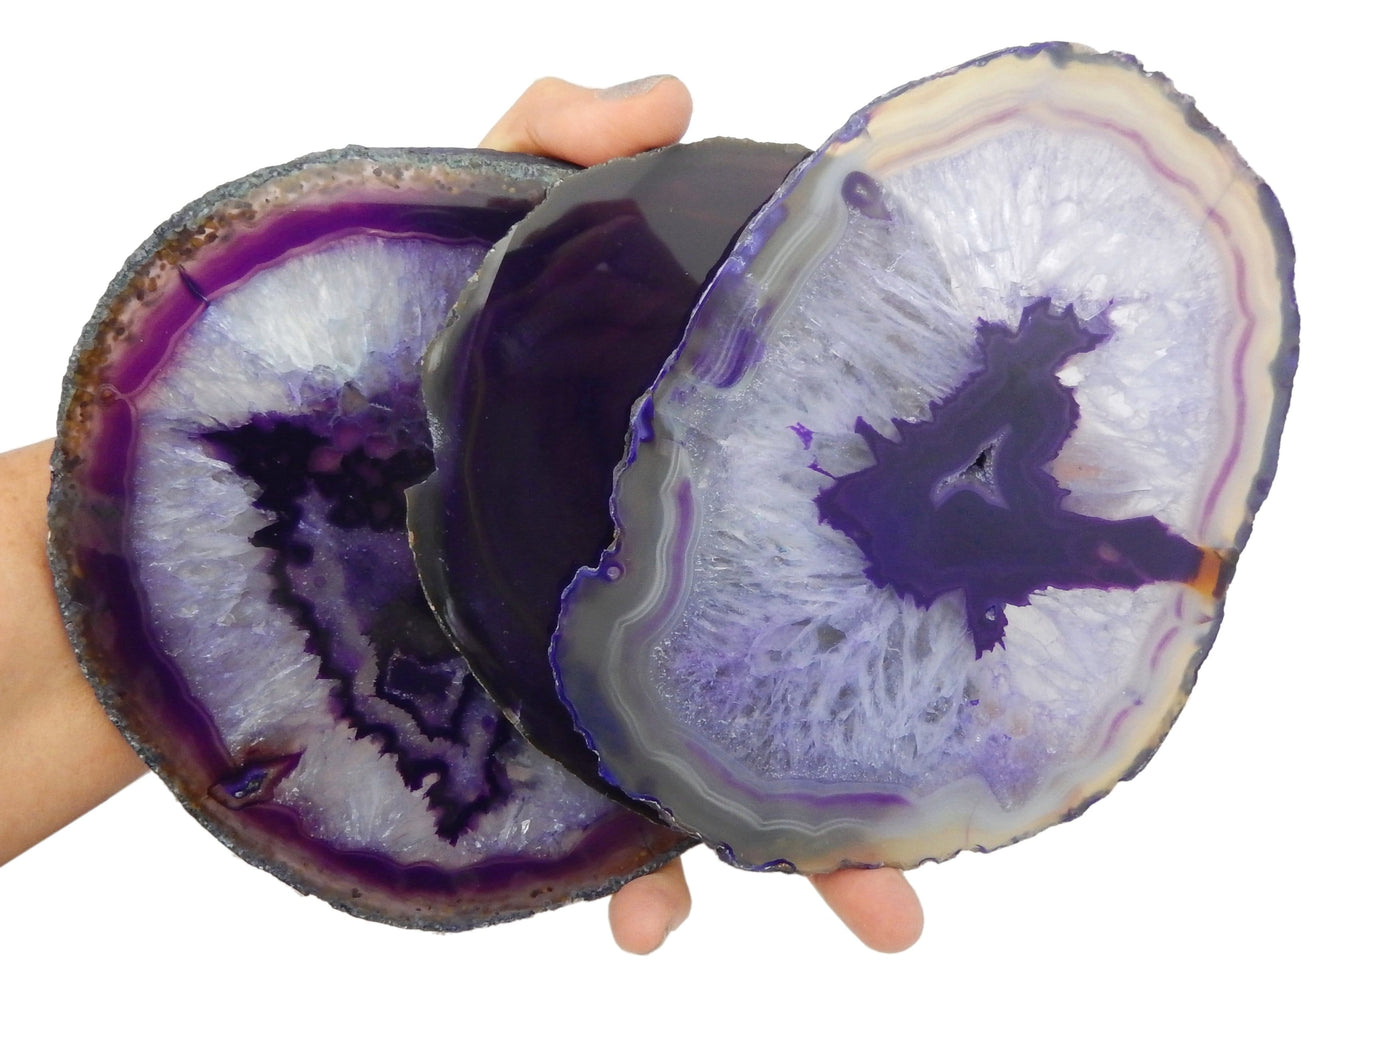 3 Purple Agate Slices #7 in a hand for size reference